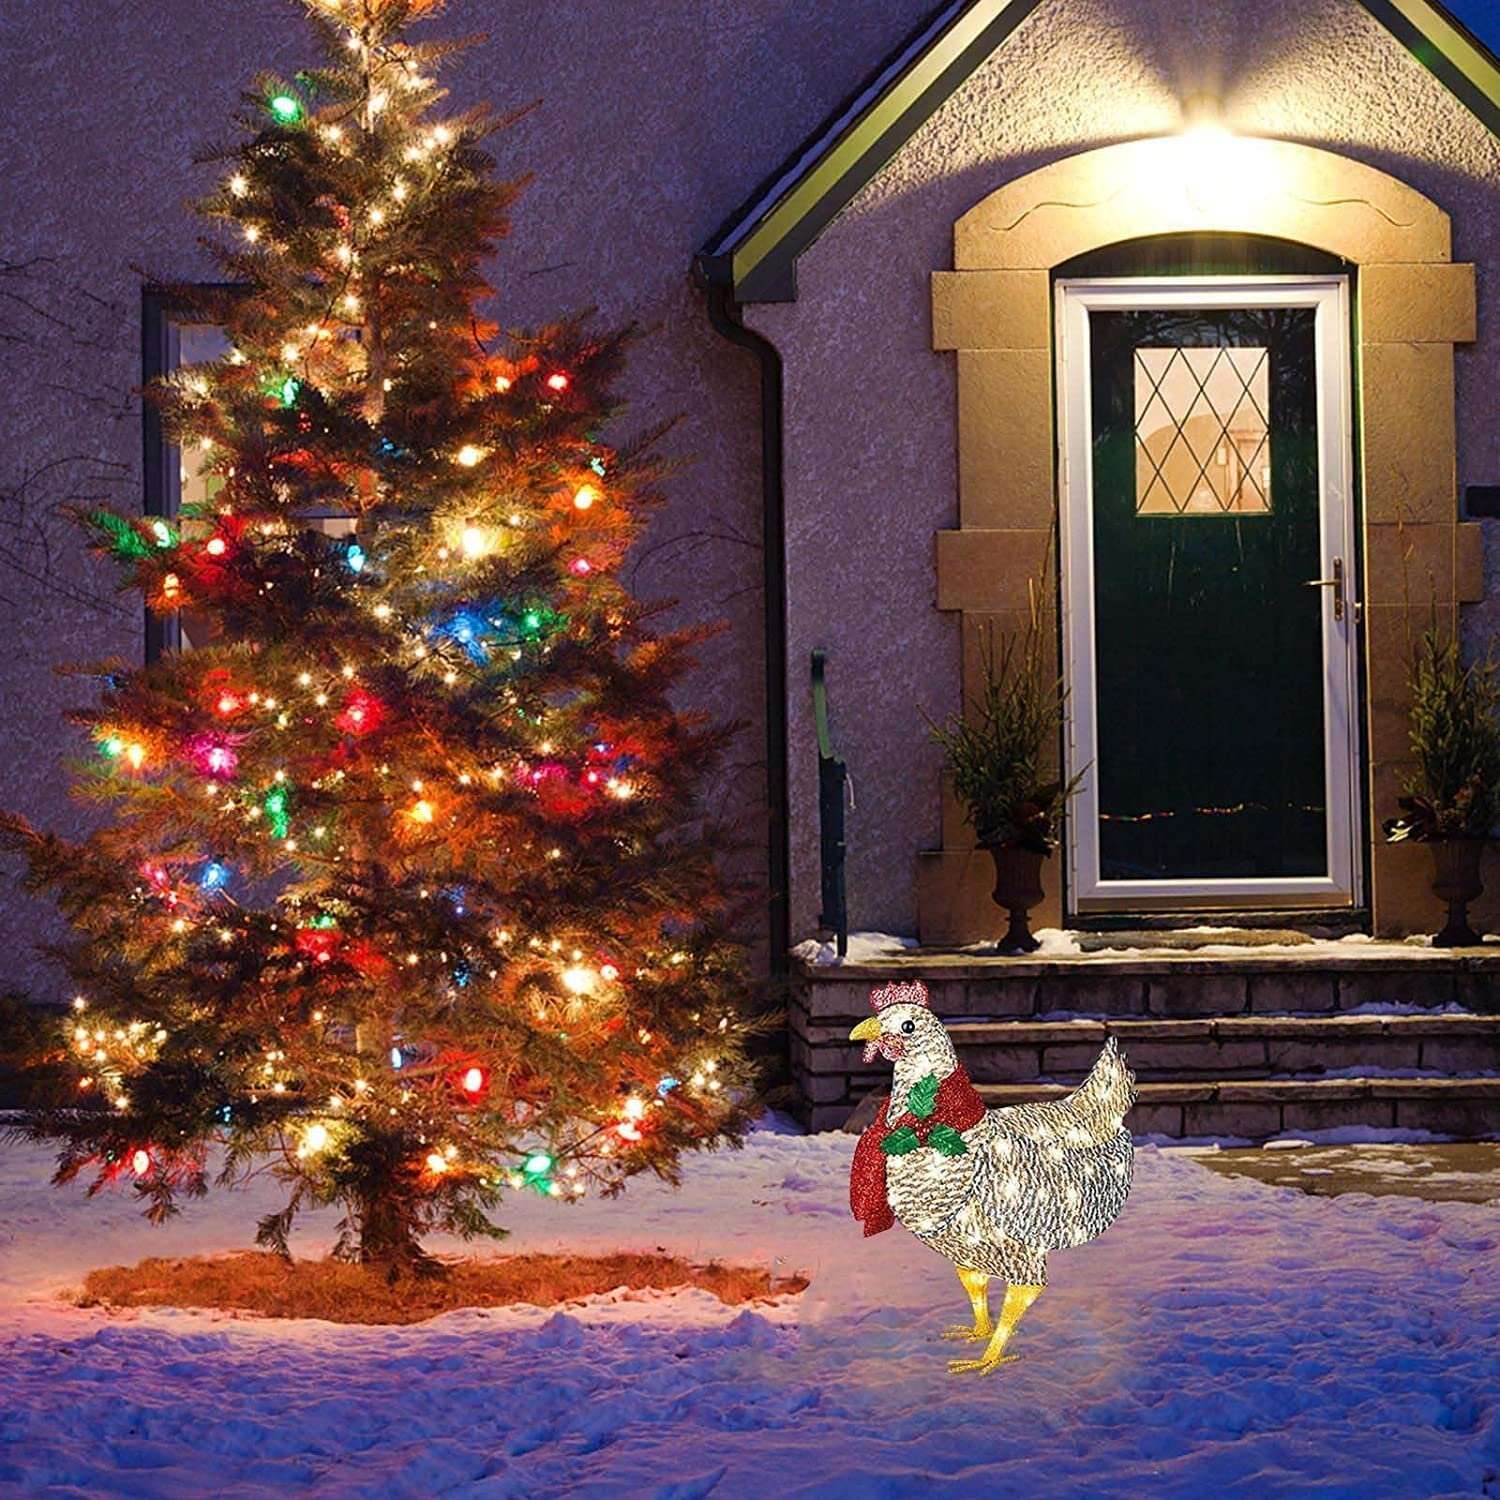 Light-Up Chicken with Scarf Holiday Decoration